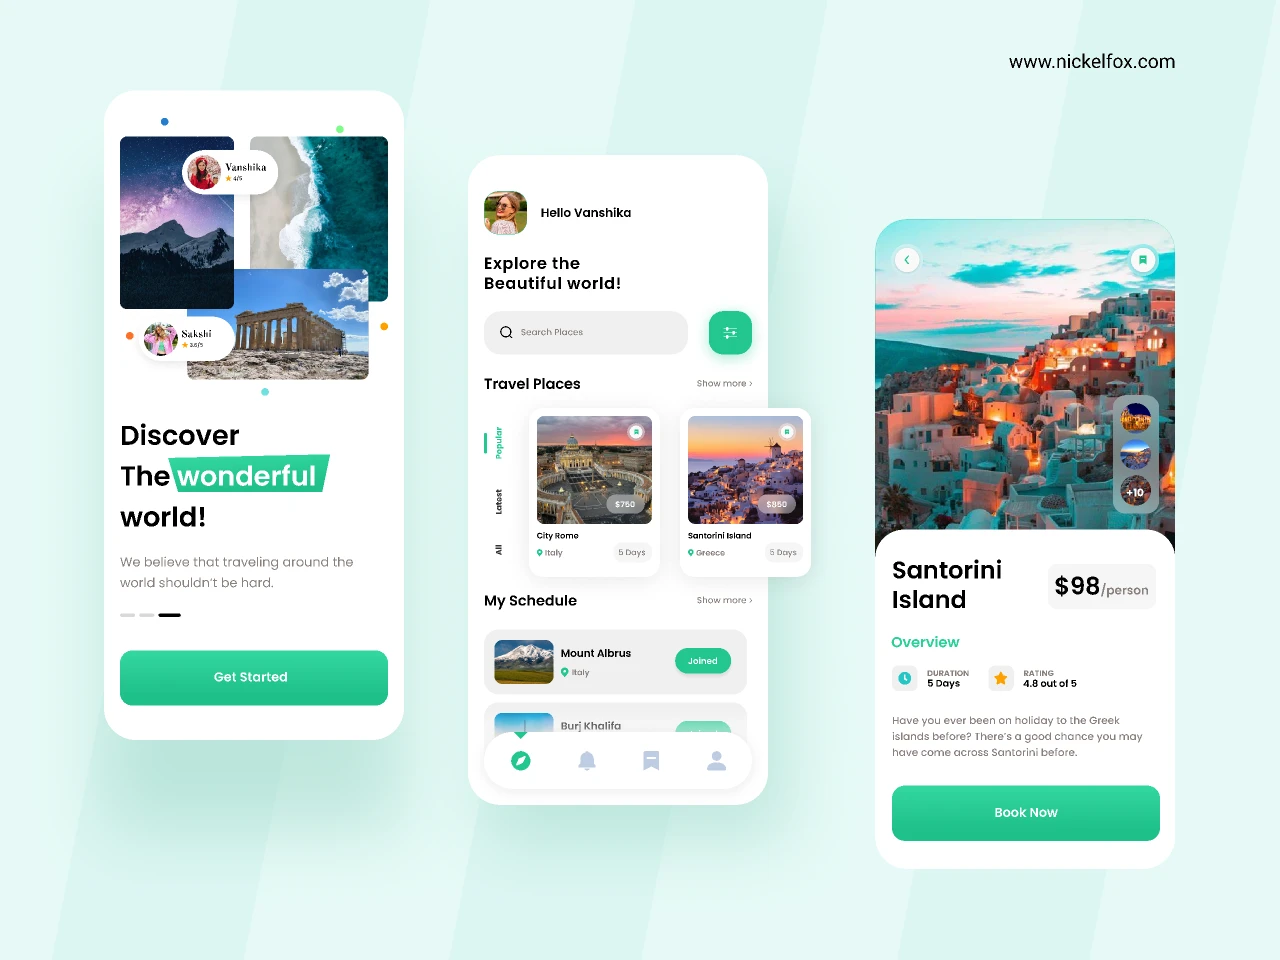 Travel App for Figma and Adobe XD